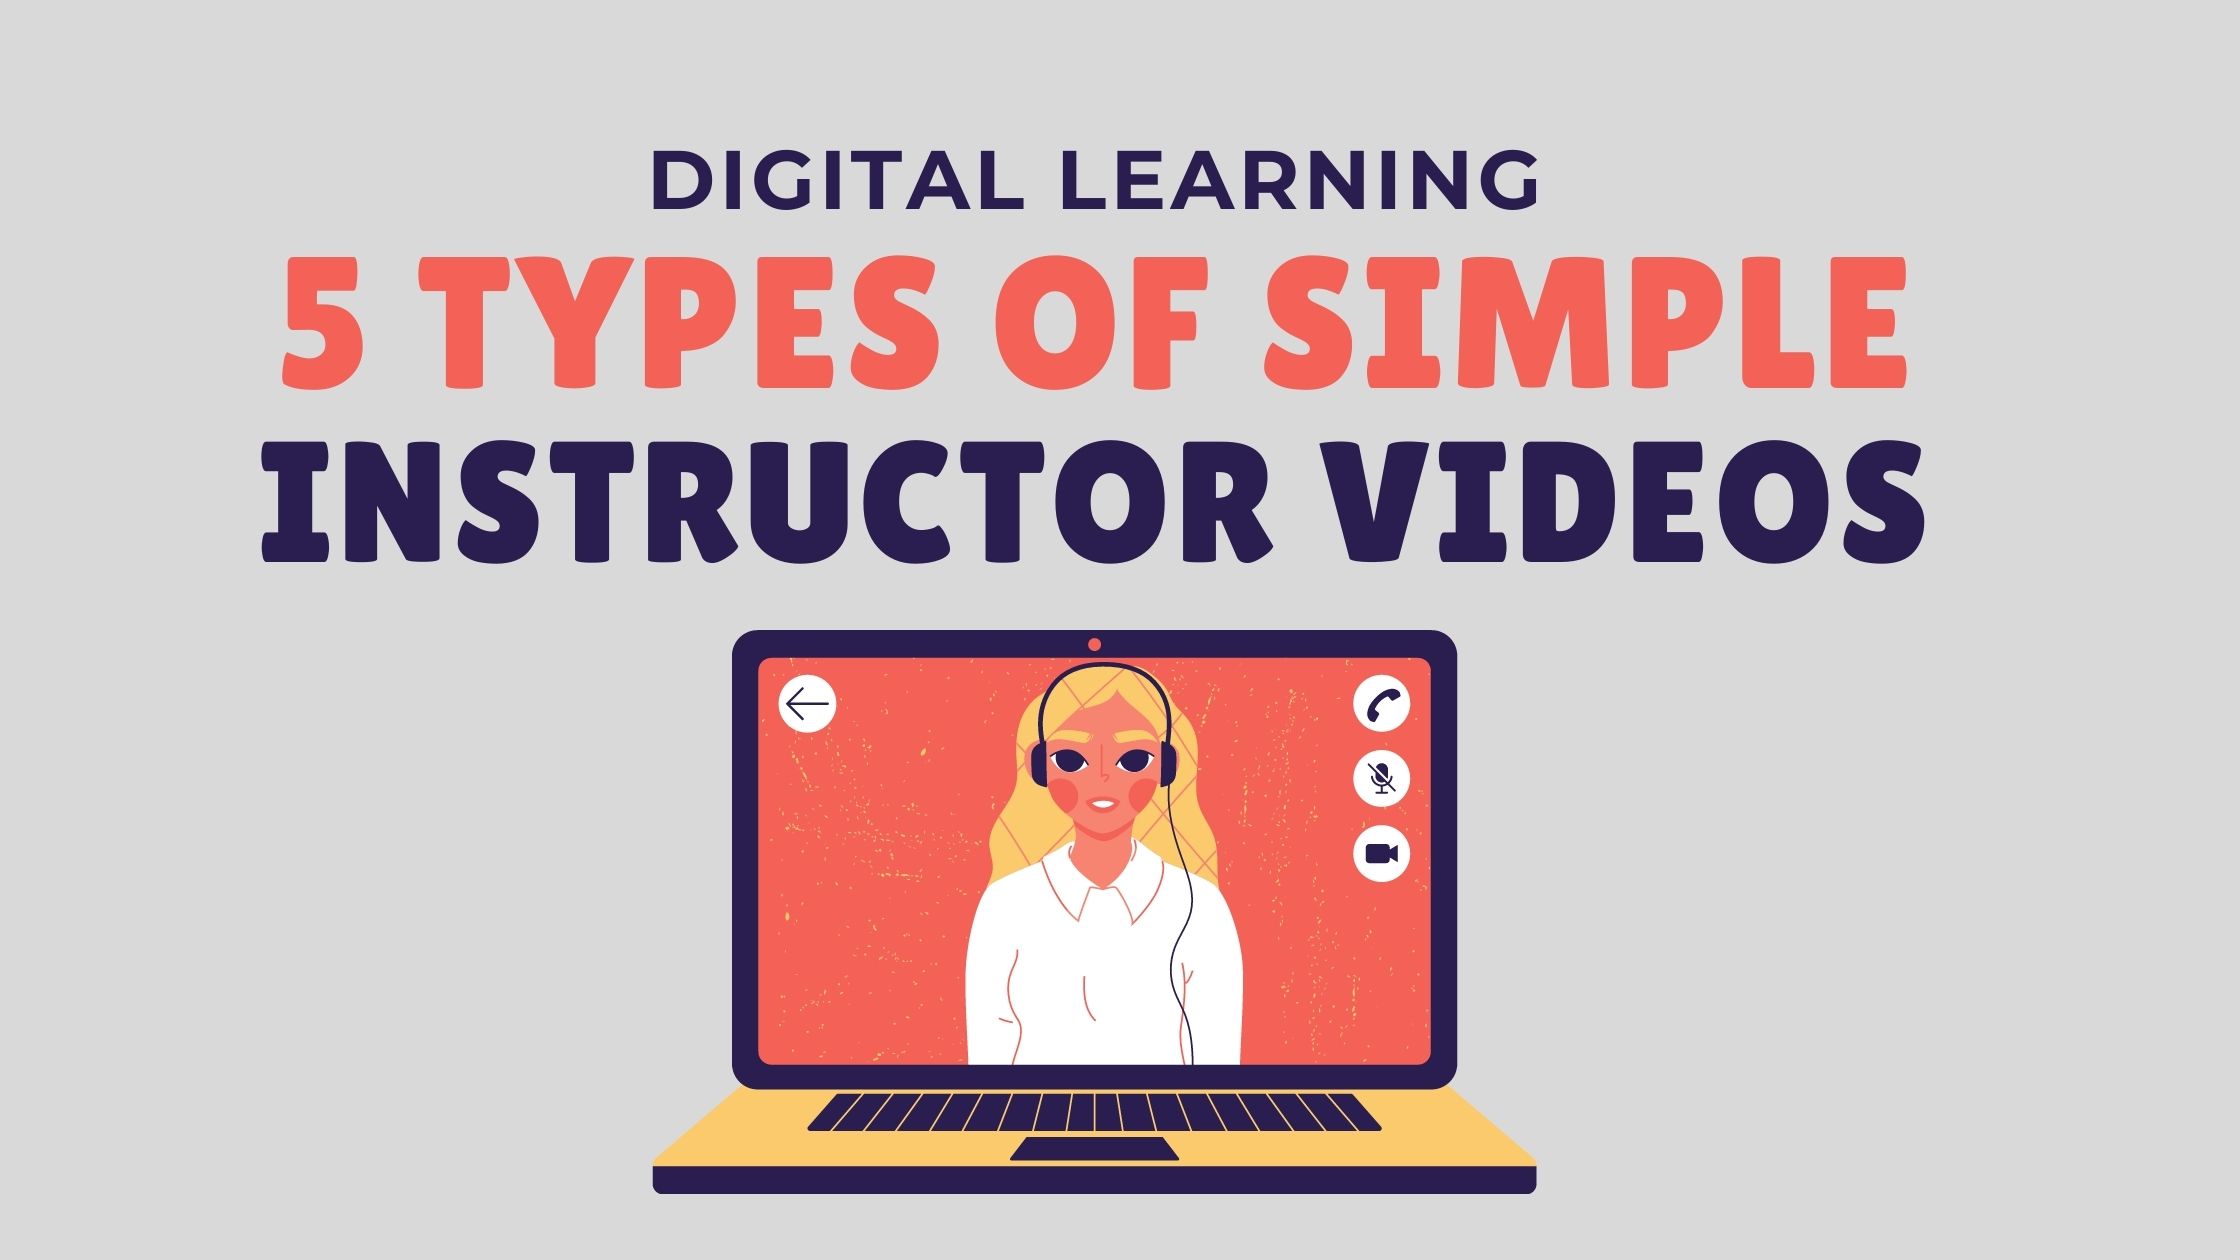 5 Simple Types of Instructor Videos